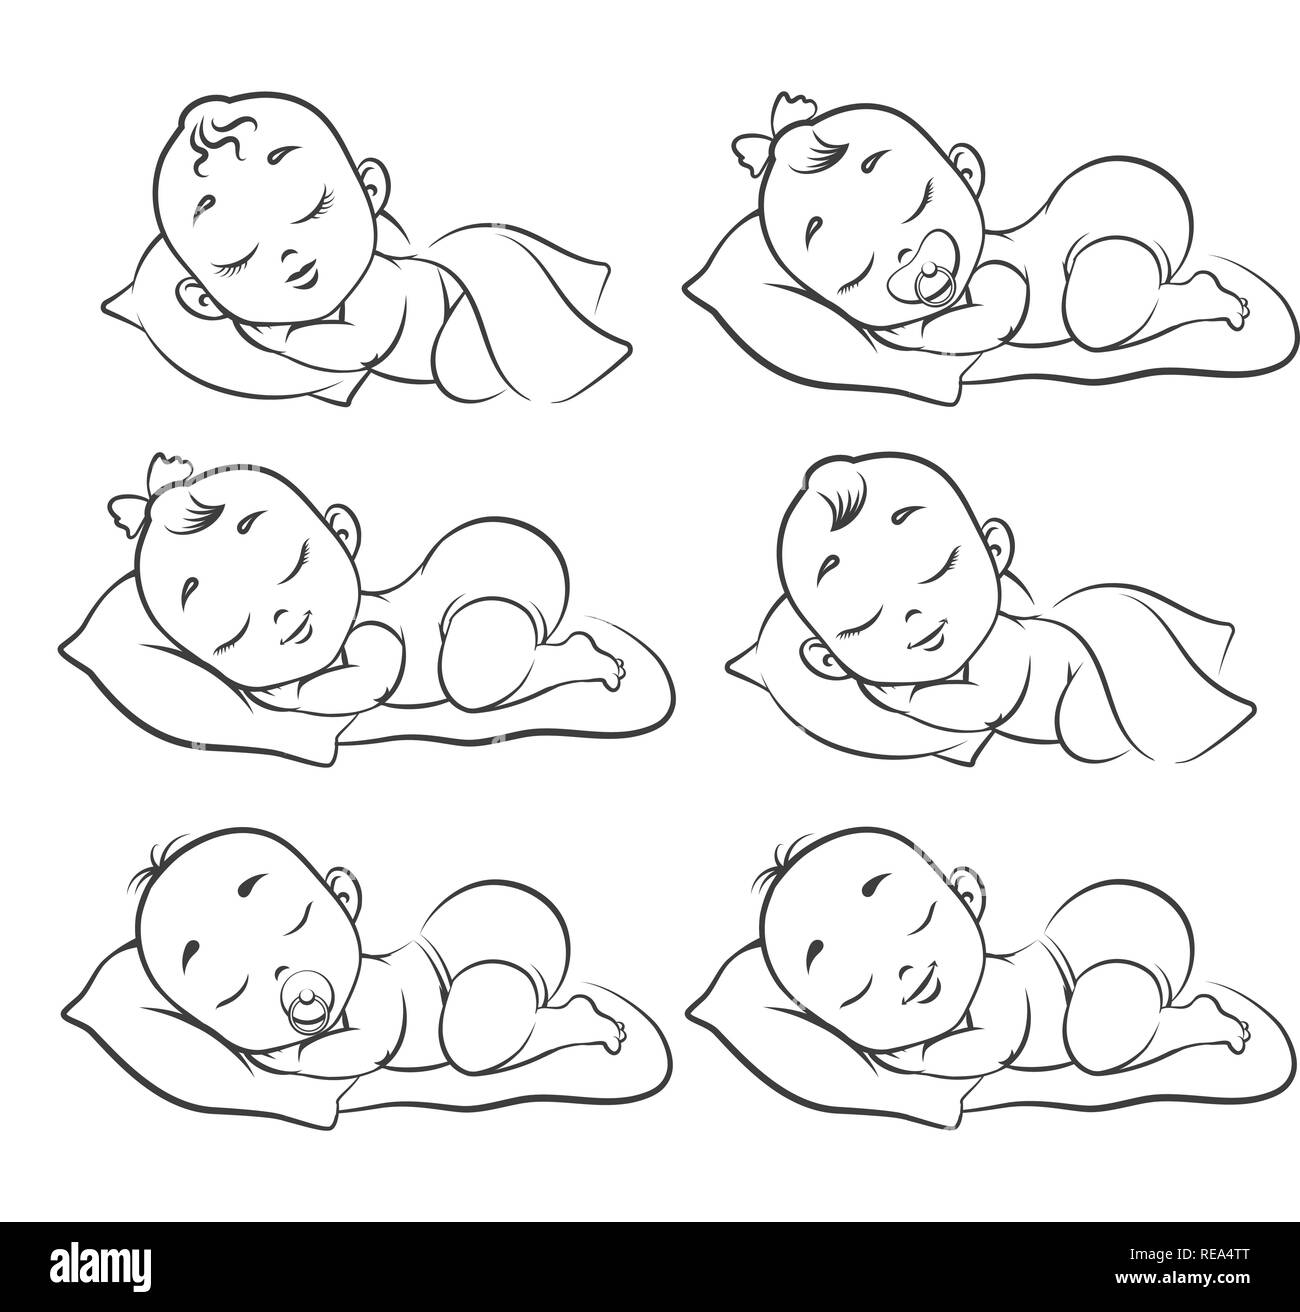 Technical Drawing Childrens Winter Baby Sleeping Stock Vector (Royalty  Free) 1370992205